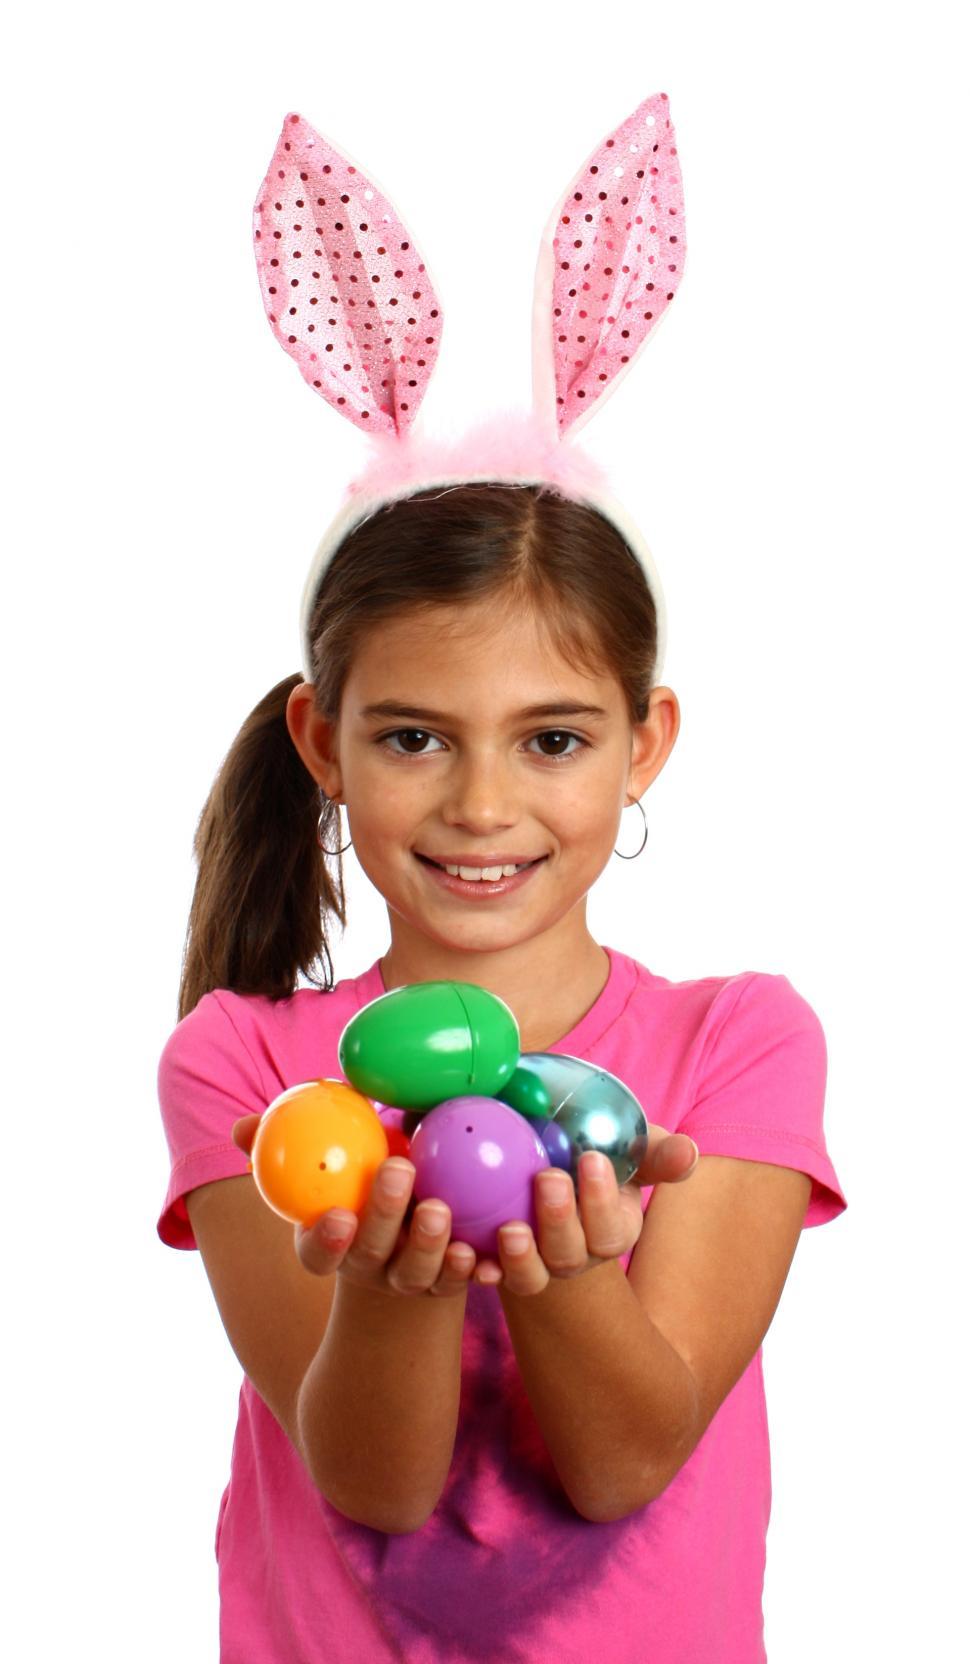 Free Image of A cute young girl holding Easter eggs 